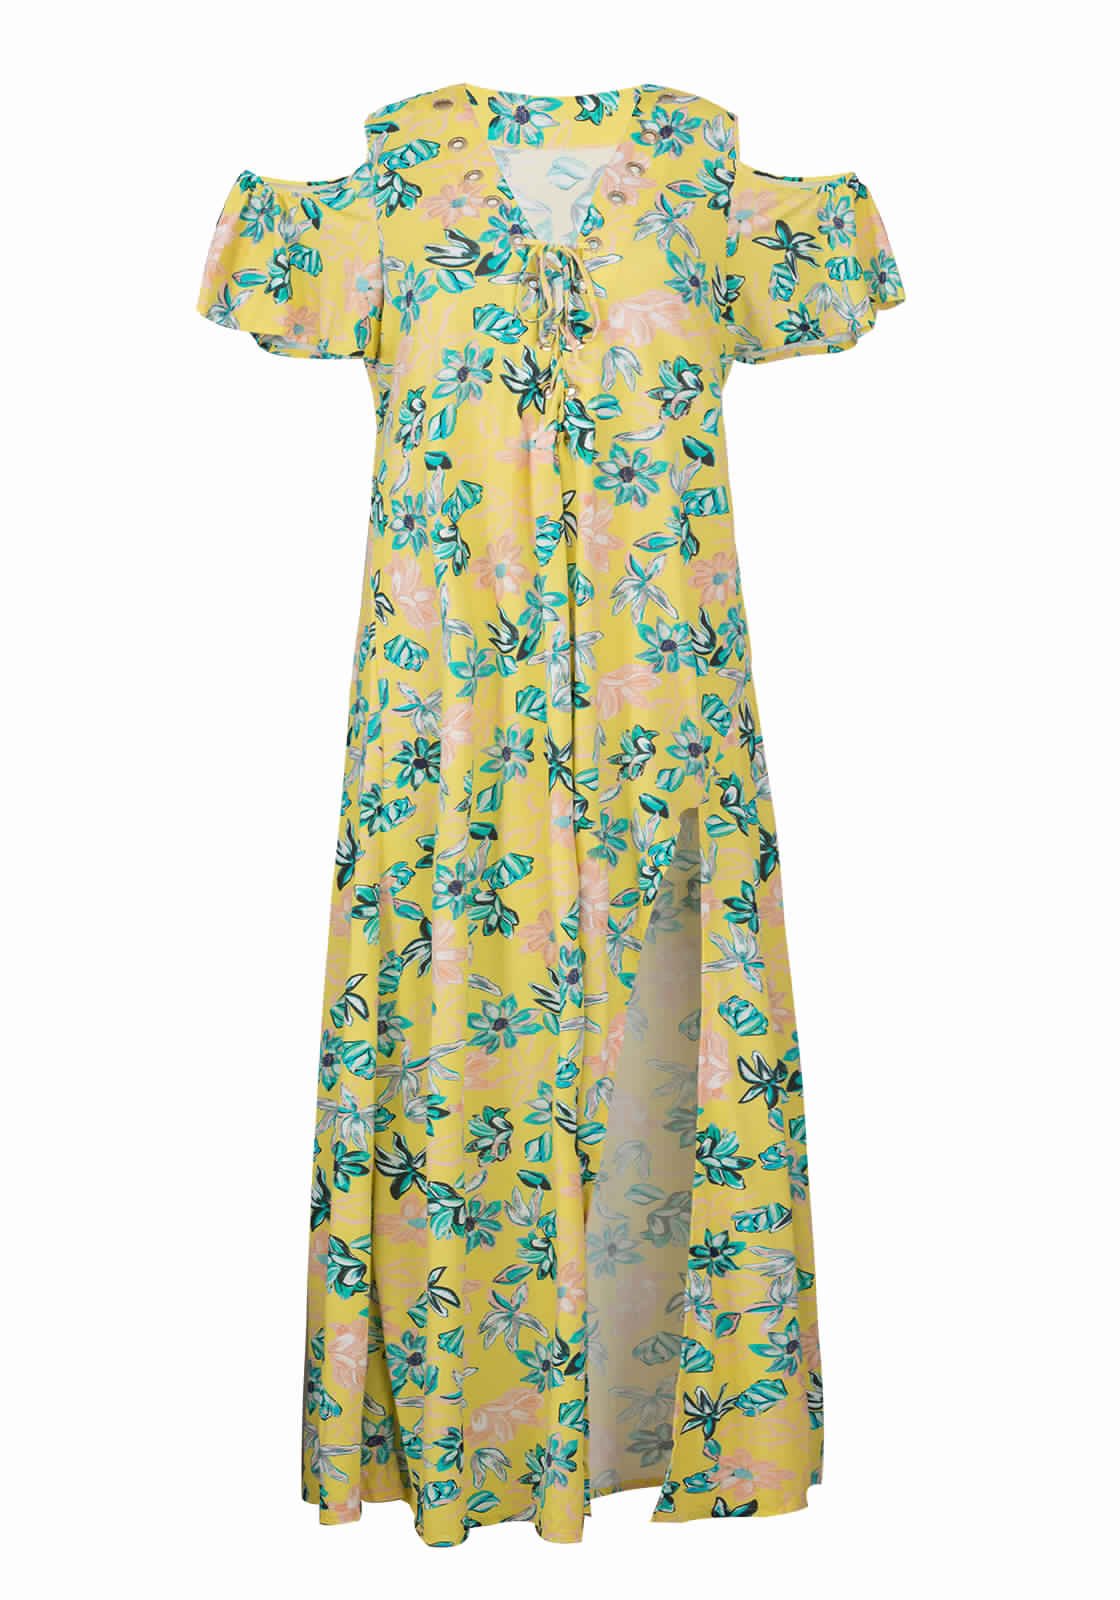 Long Yellow Beach Dress With Flowers And Laced Neckline - Saida Long ...